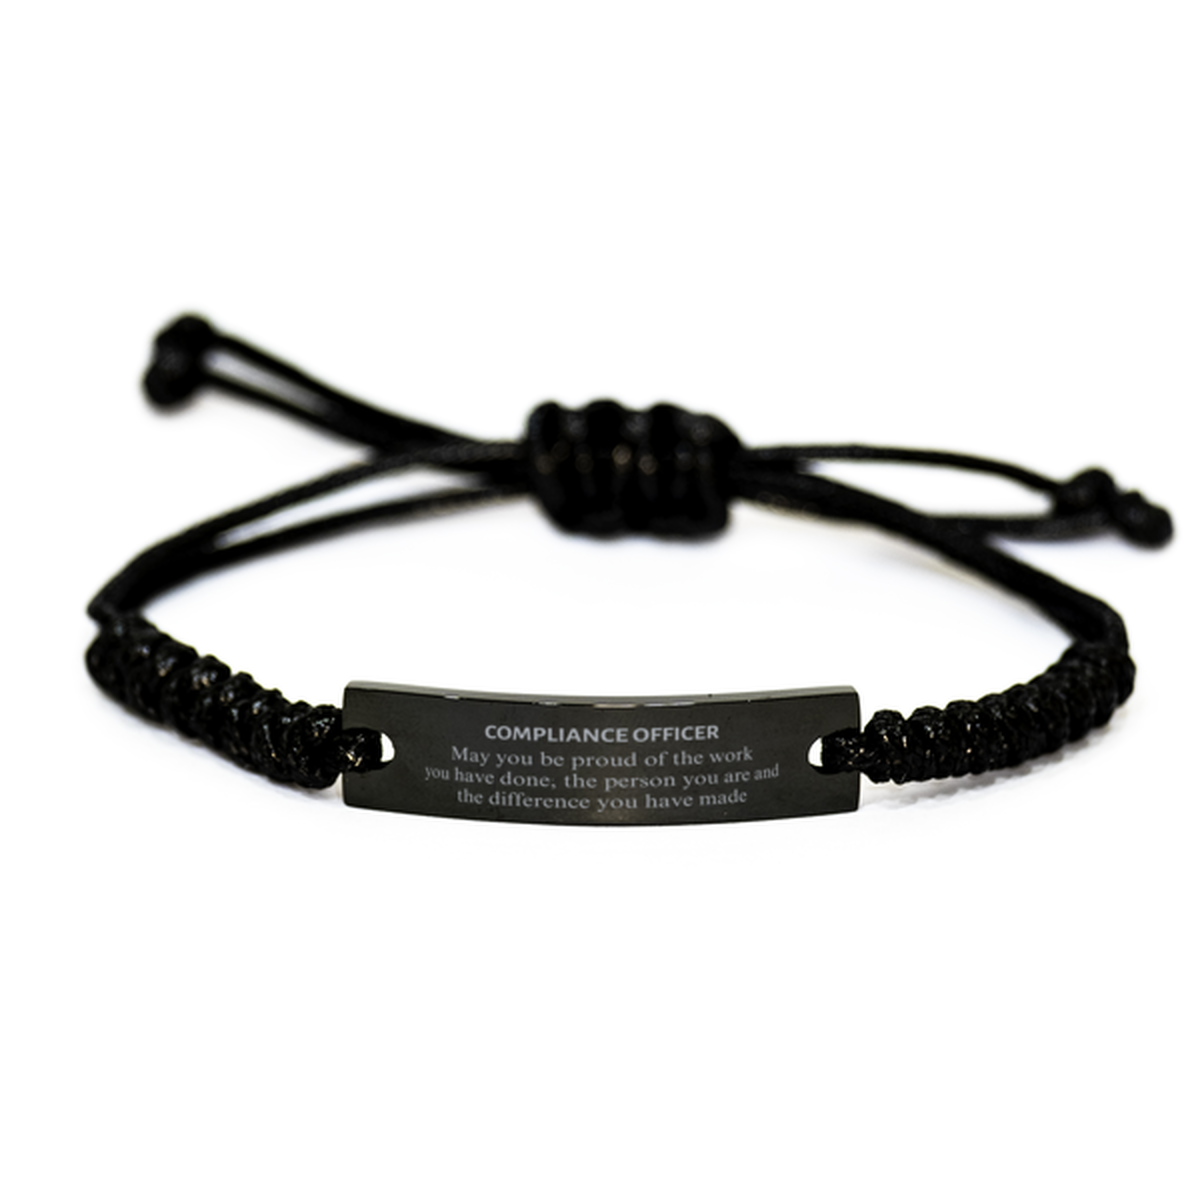 Compliance Officer May you be proud of the work you have done, Retirement Compliance Officer Black Rope Bracelet for Colleague Appreciation Gifts Amazing for Compliance Officer